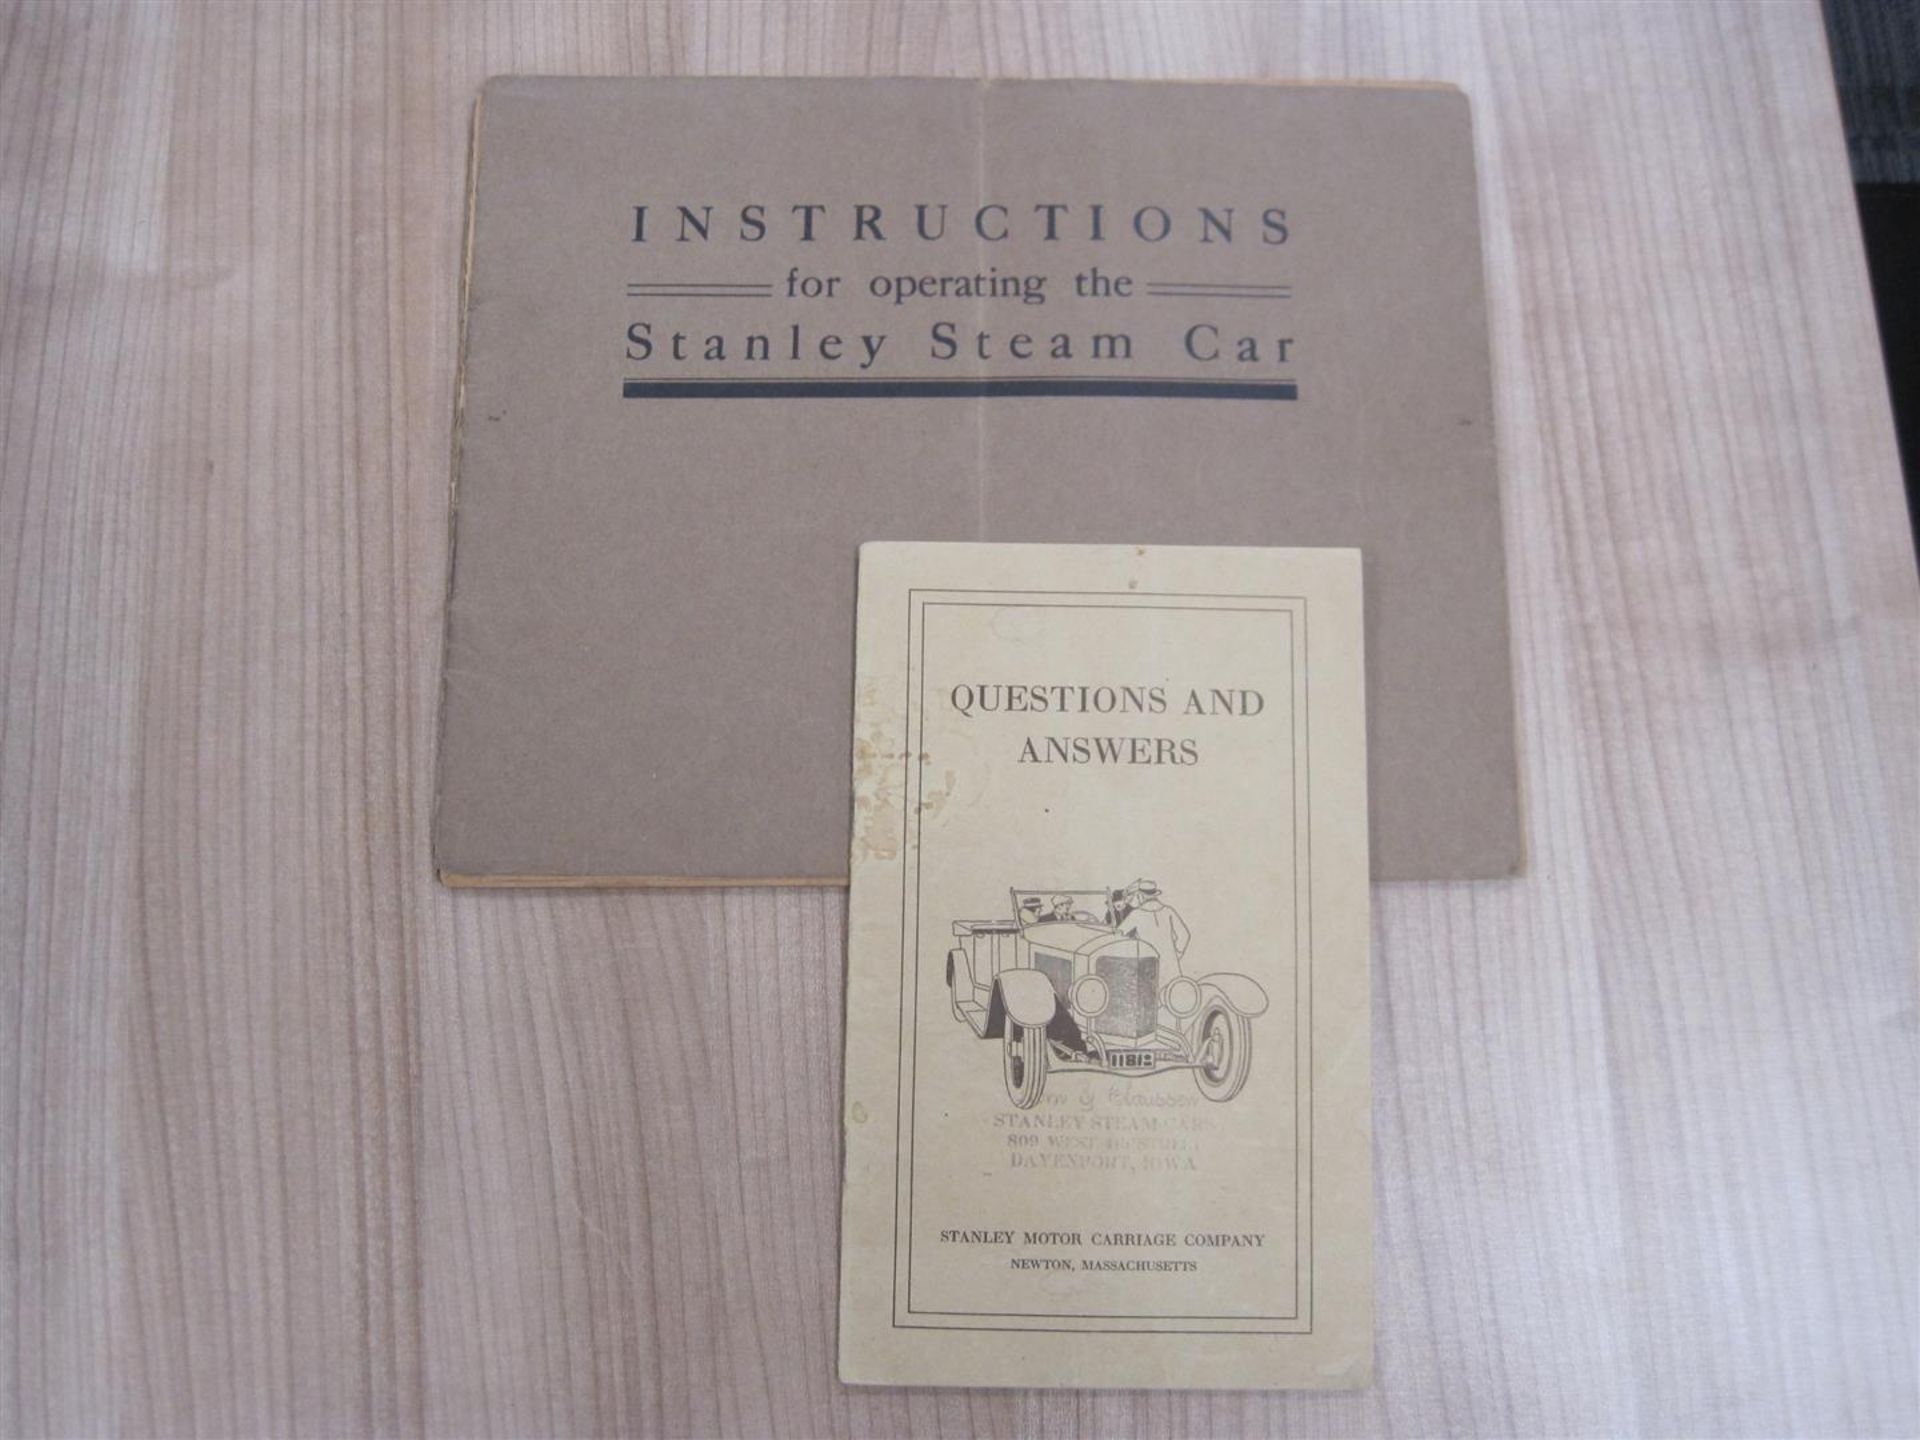 Instructions for operating the Stanley Steam Car (1911 26pp) t/w Questions & Answers (20pp)